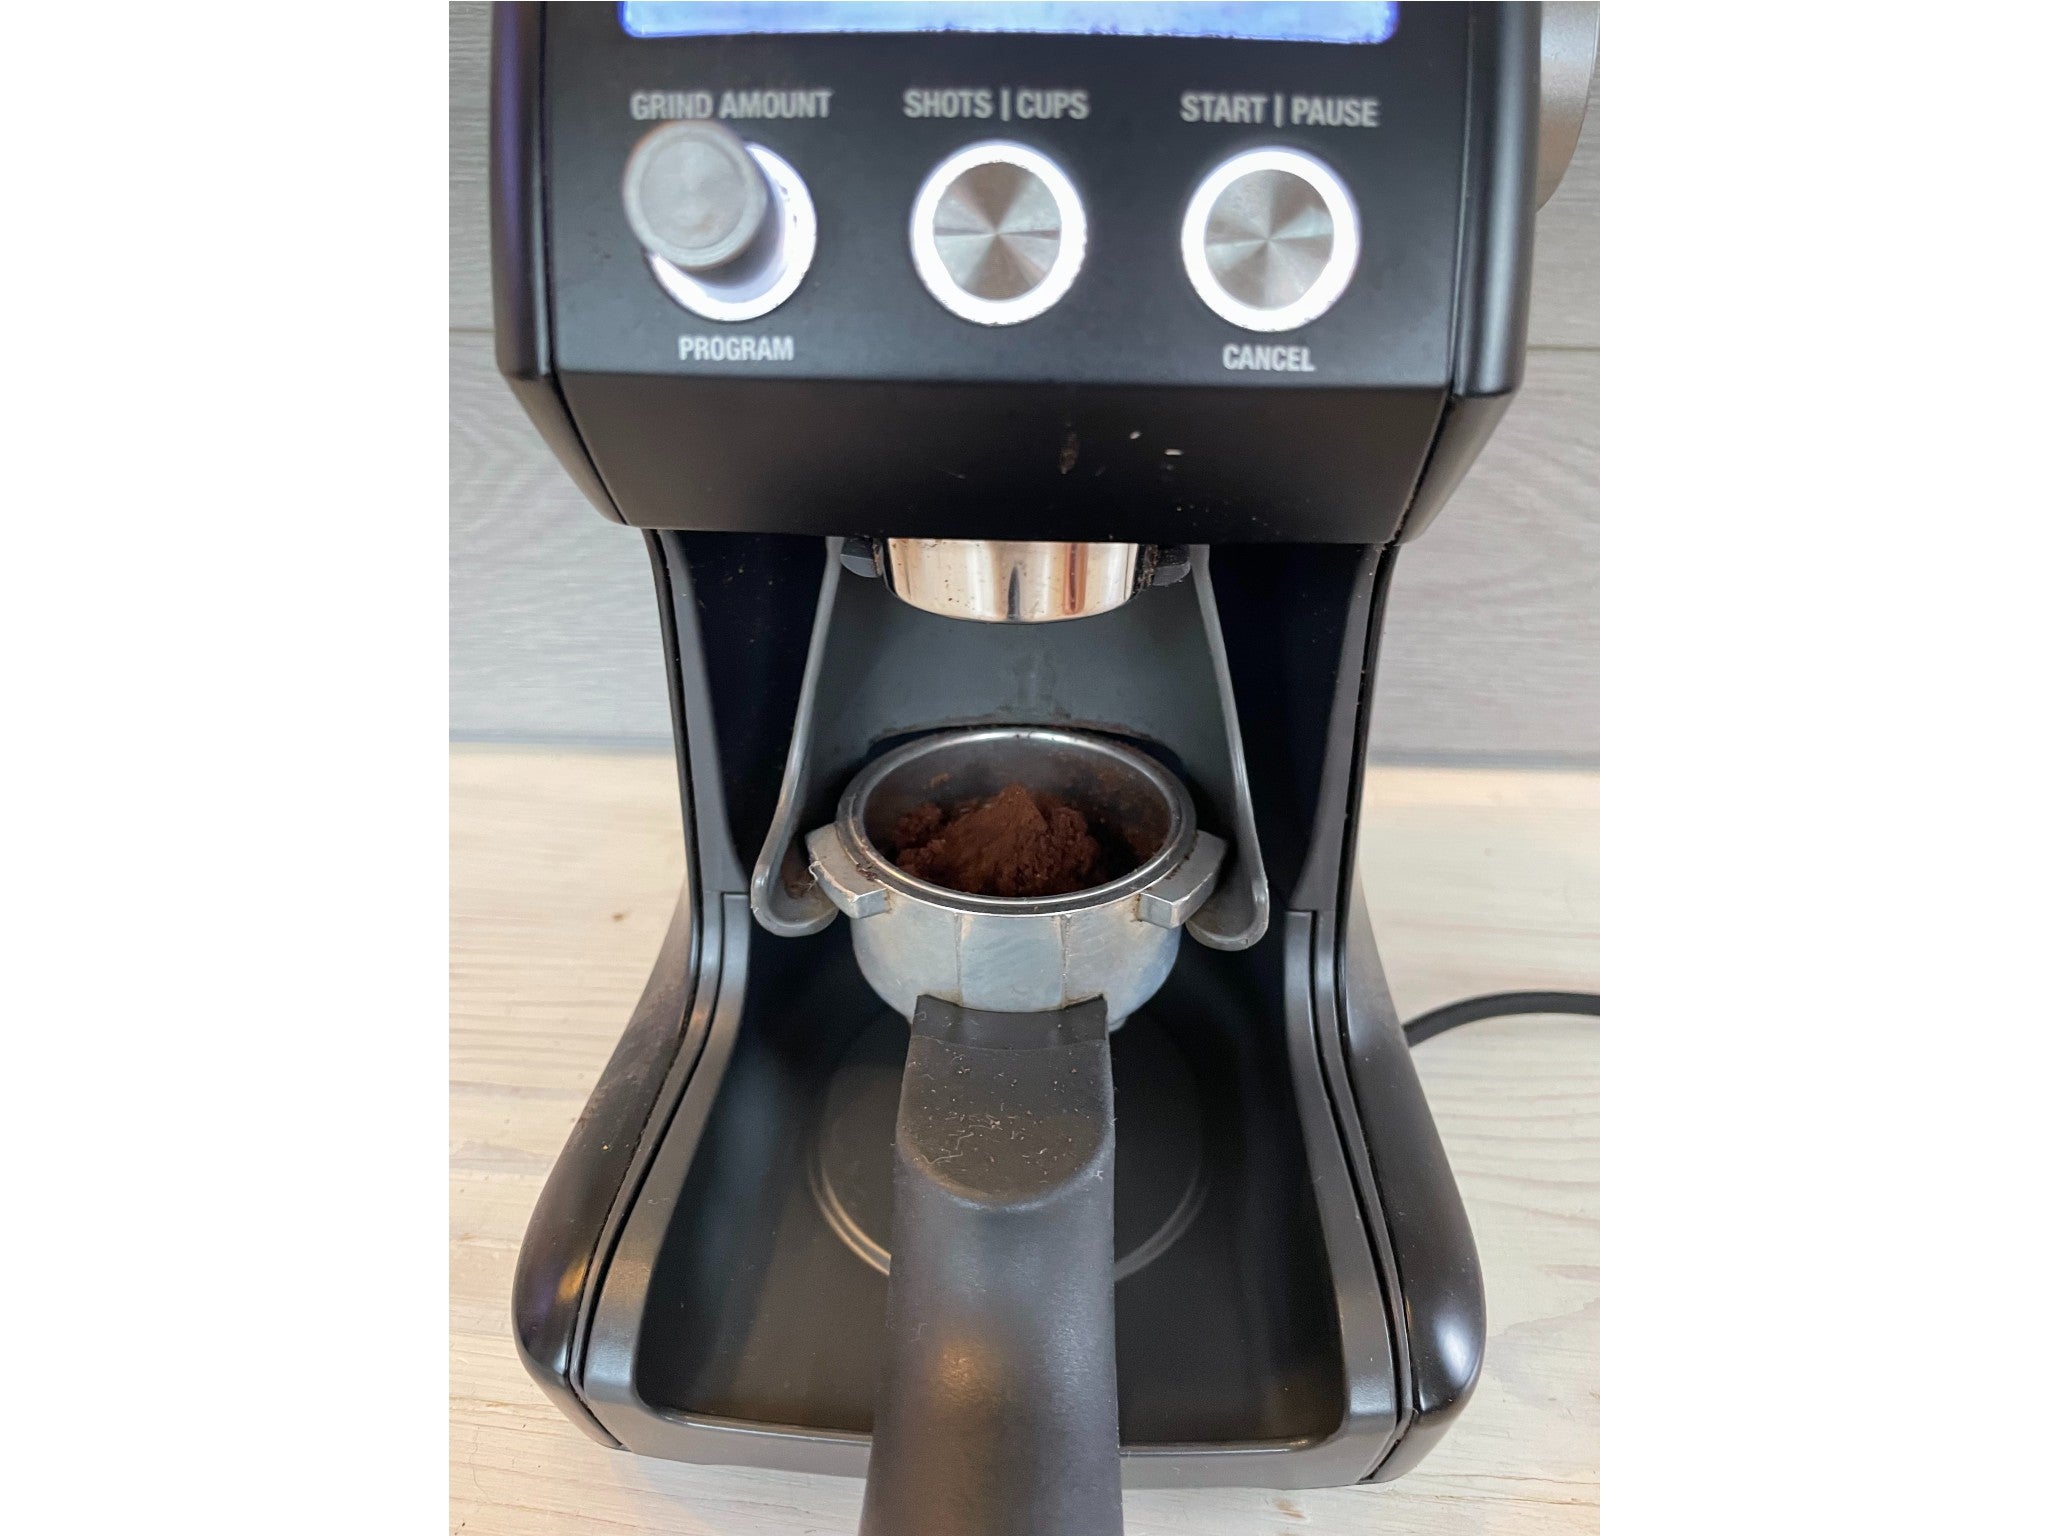 You can kick it into action by pushing the portafilter into its cradle – no button pressing necessary